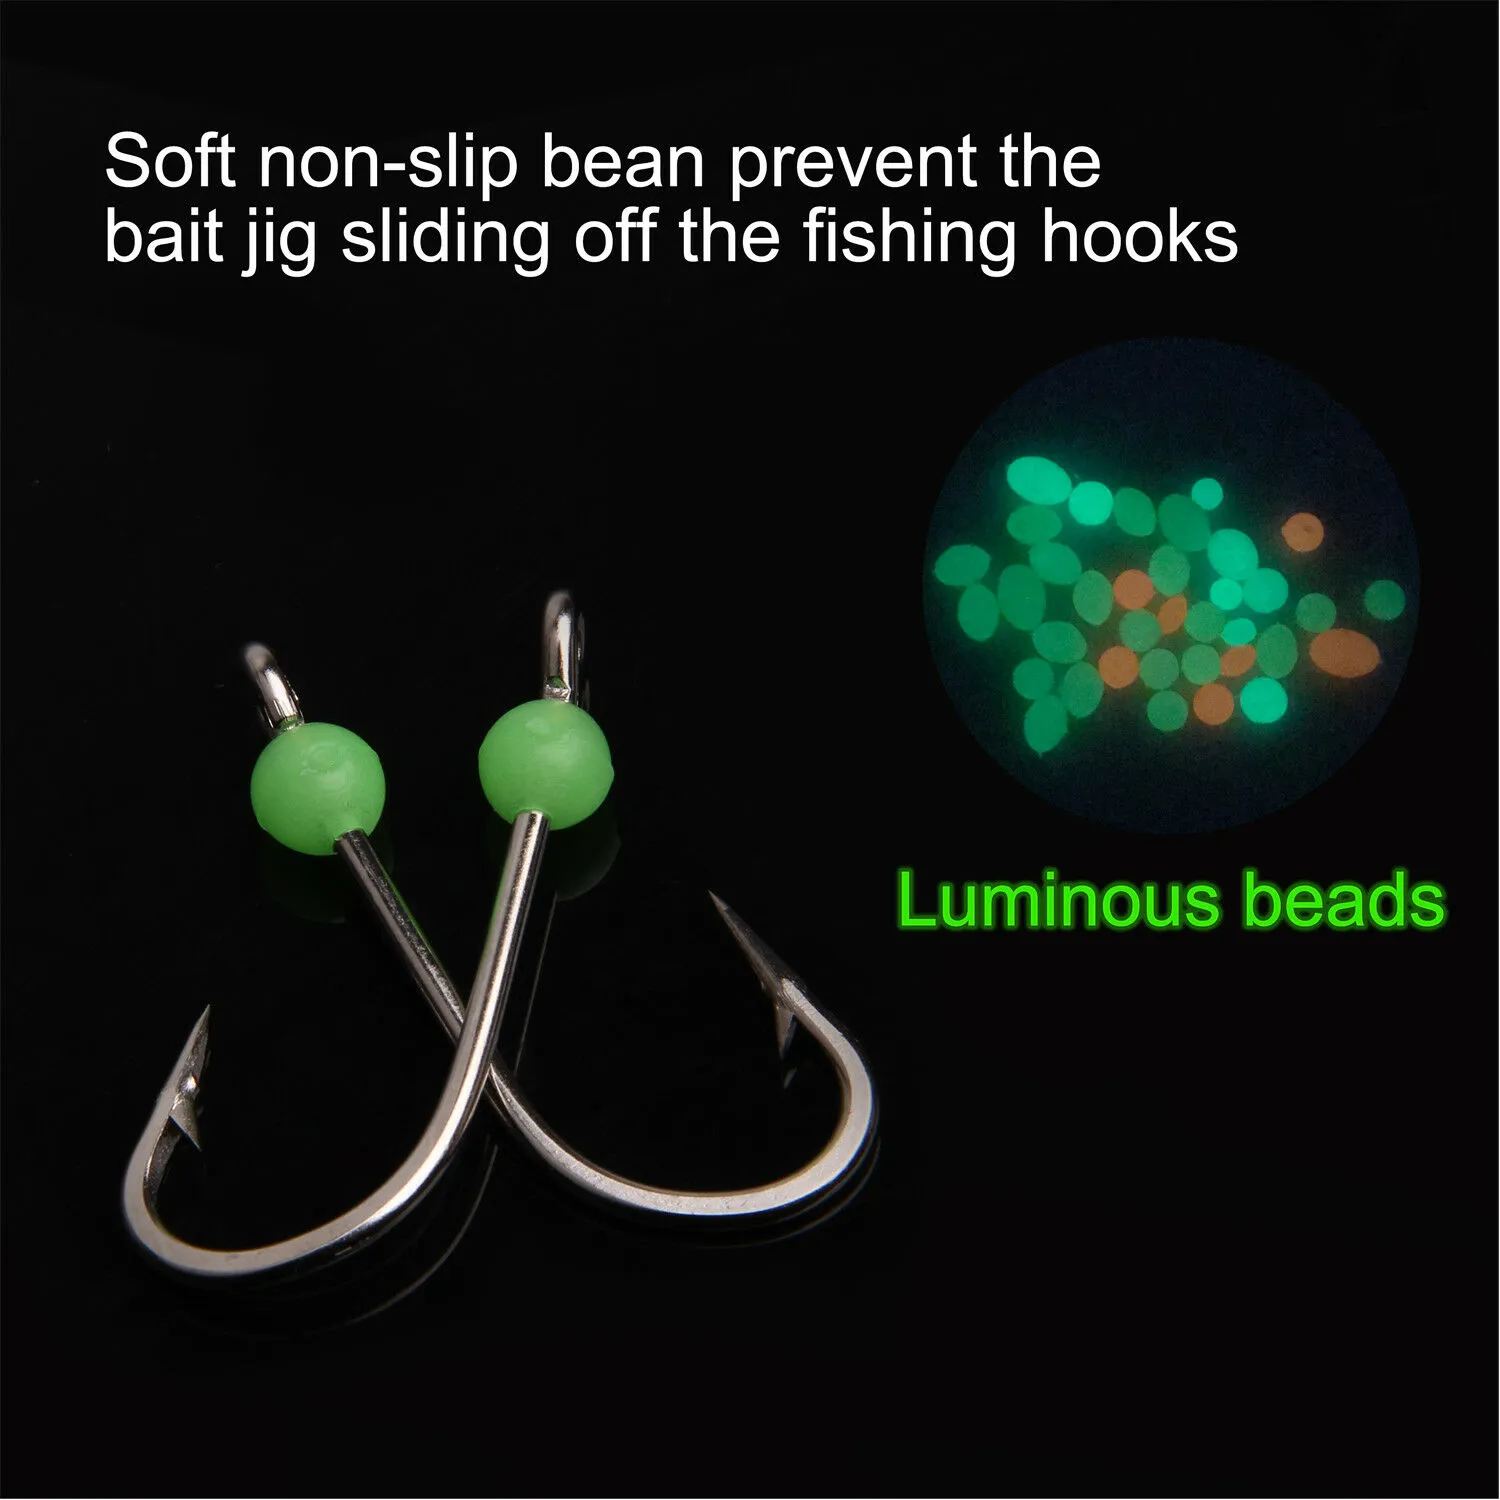 Stainless Steel Saltwater Fishing Hooks Kit Long Shank 1/0 5/0 Tackle  Supplier For Hooks, Lures & Gears. From Enjoyoutdoors, $9.86